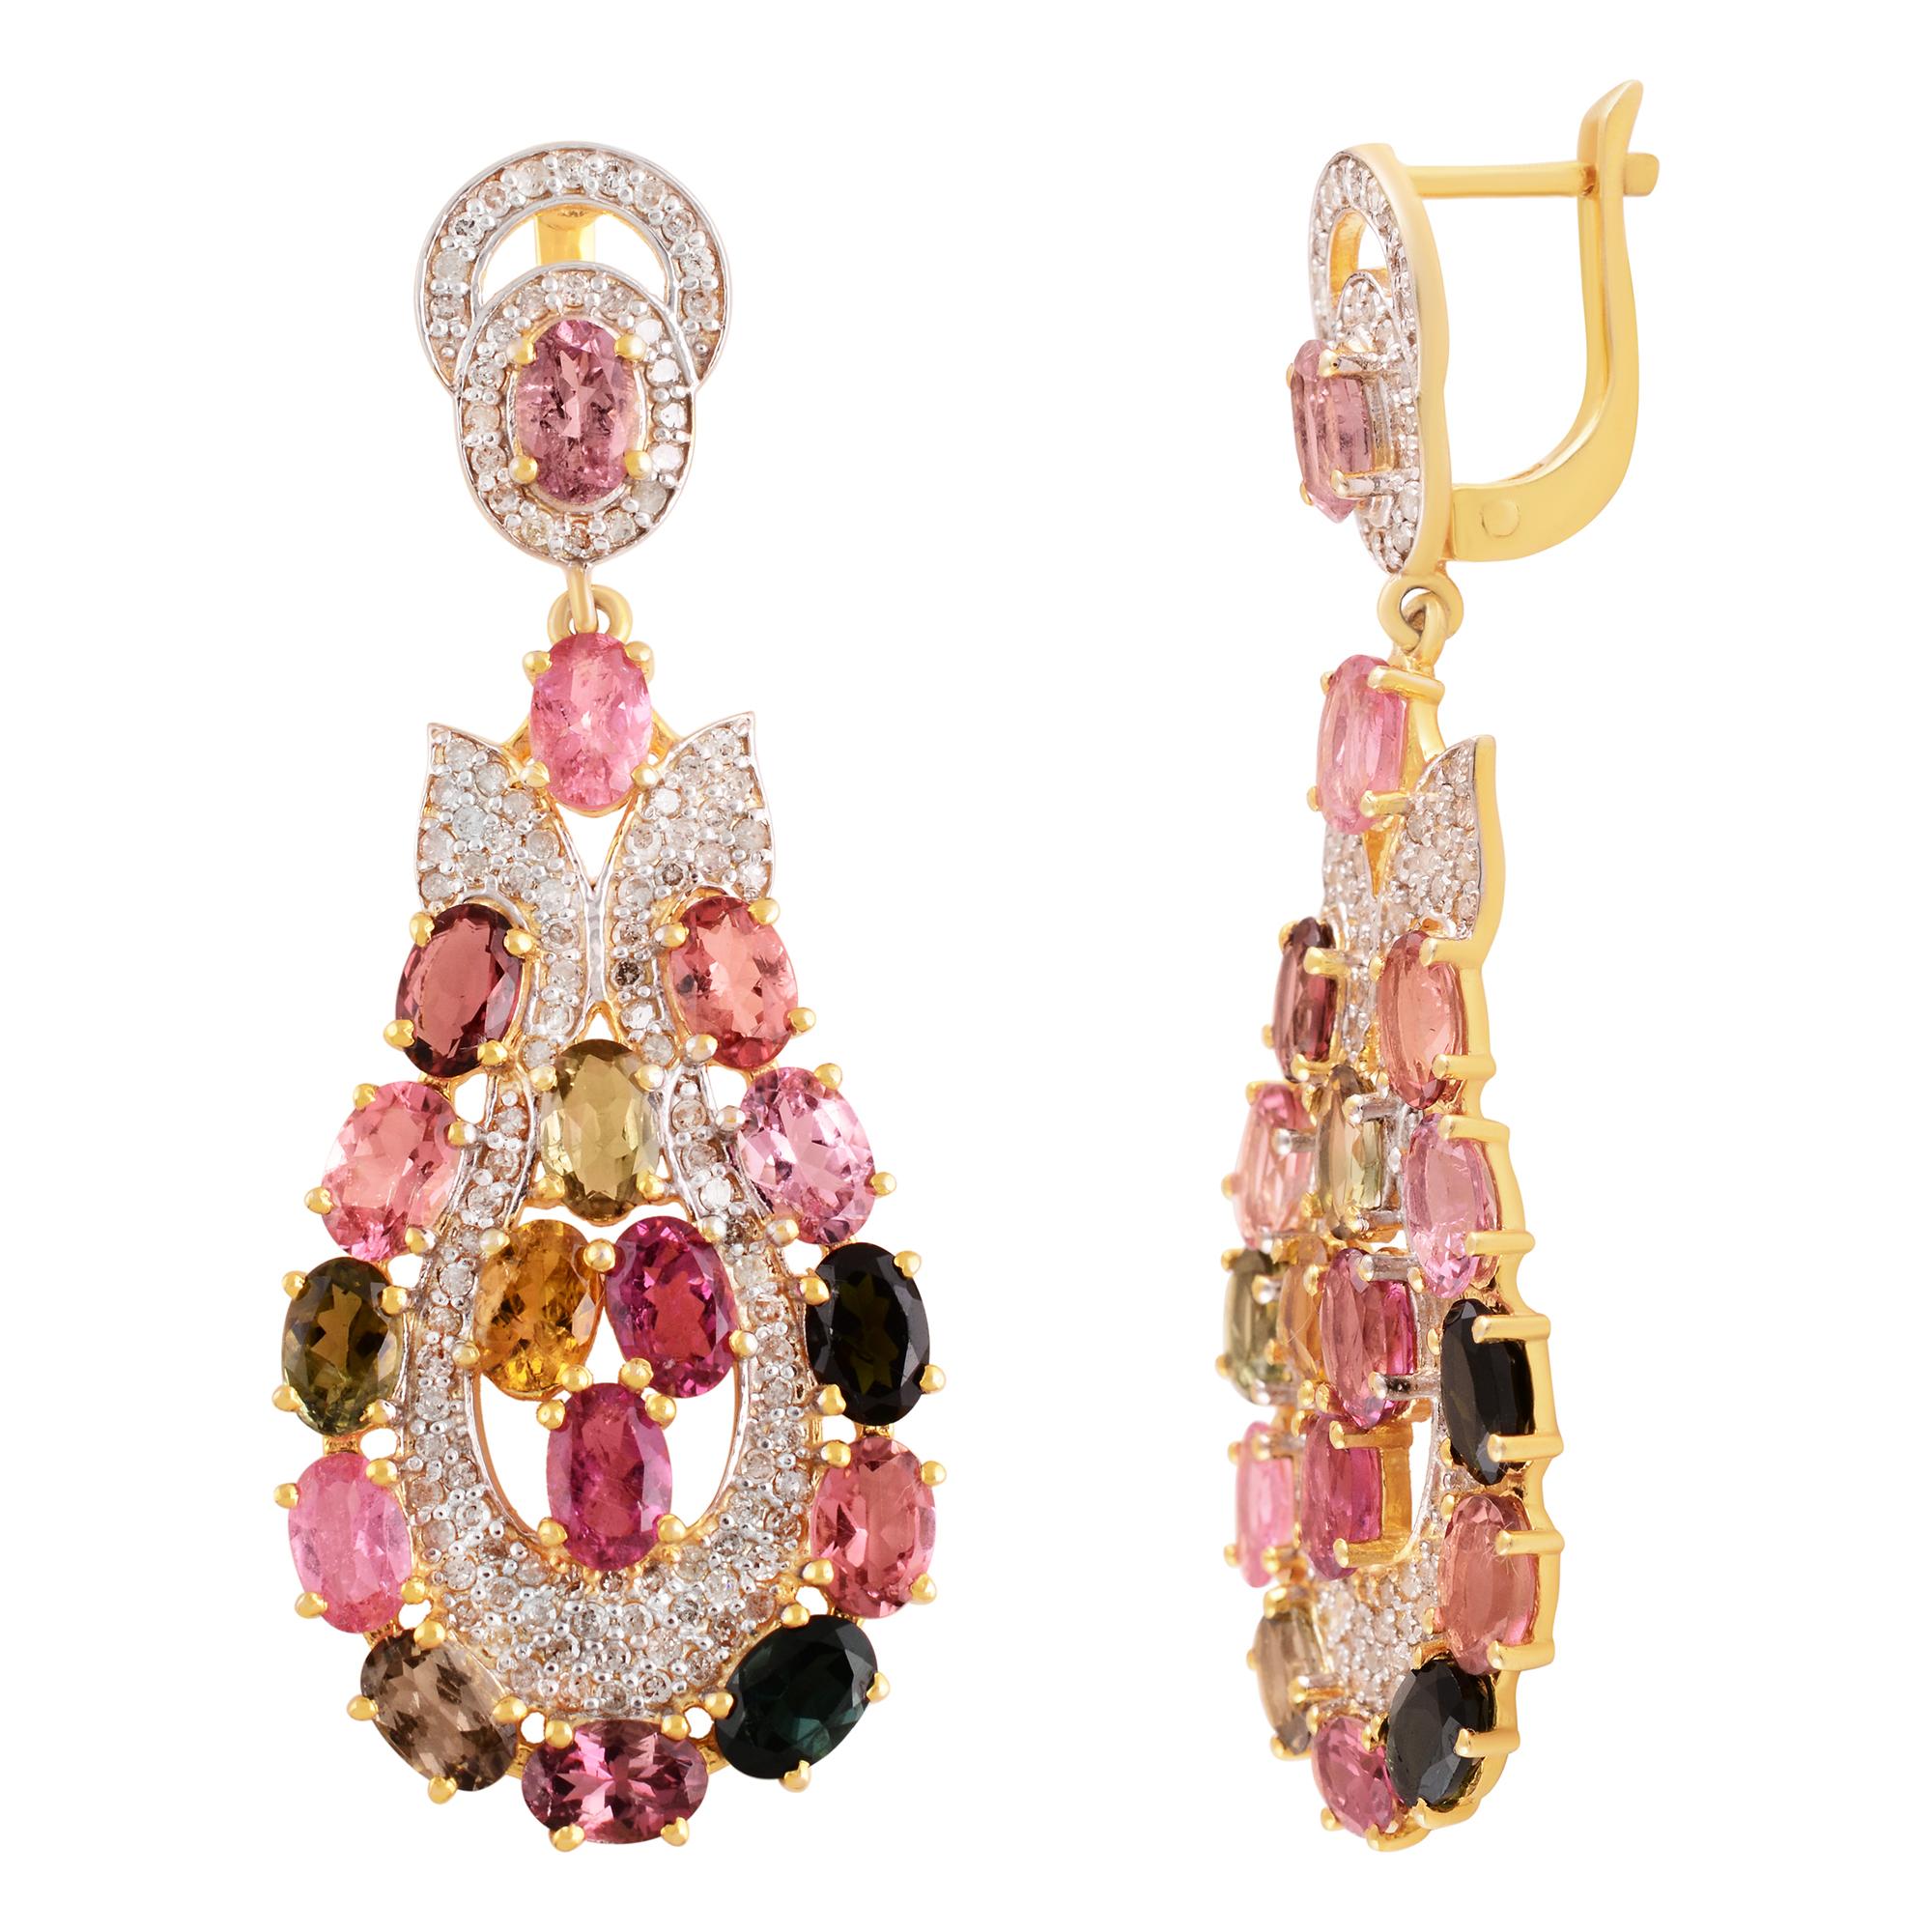 Cast from 14K gold & sterling silver, these beautiful drop earrings are hand set in 16.40 carats tourmaline and 1.47 carats of sparkling diamonds.

FOLLOW  MEGHNA JEWELS storefront to view the latest collection & exclusive pieces.  Meghna Jewels is